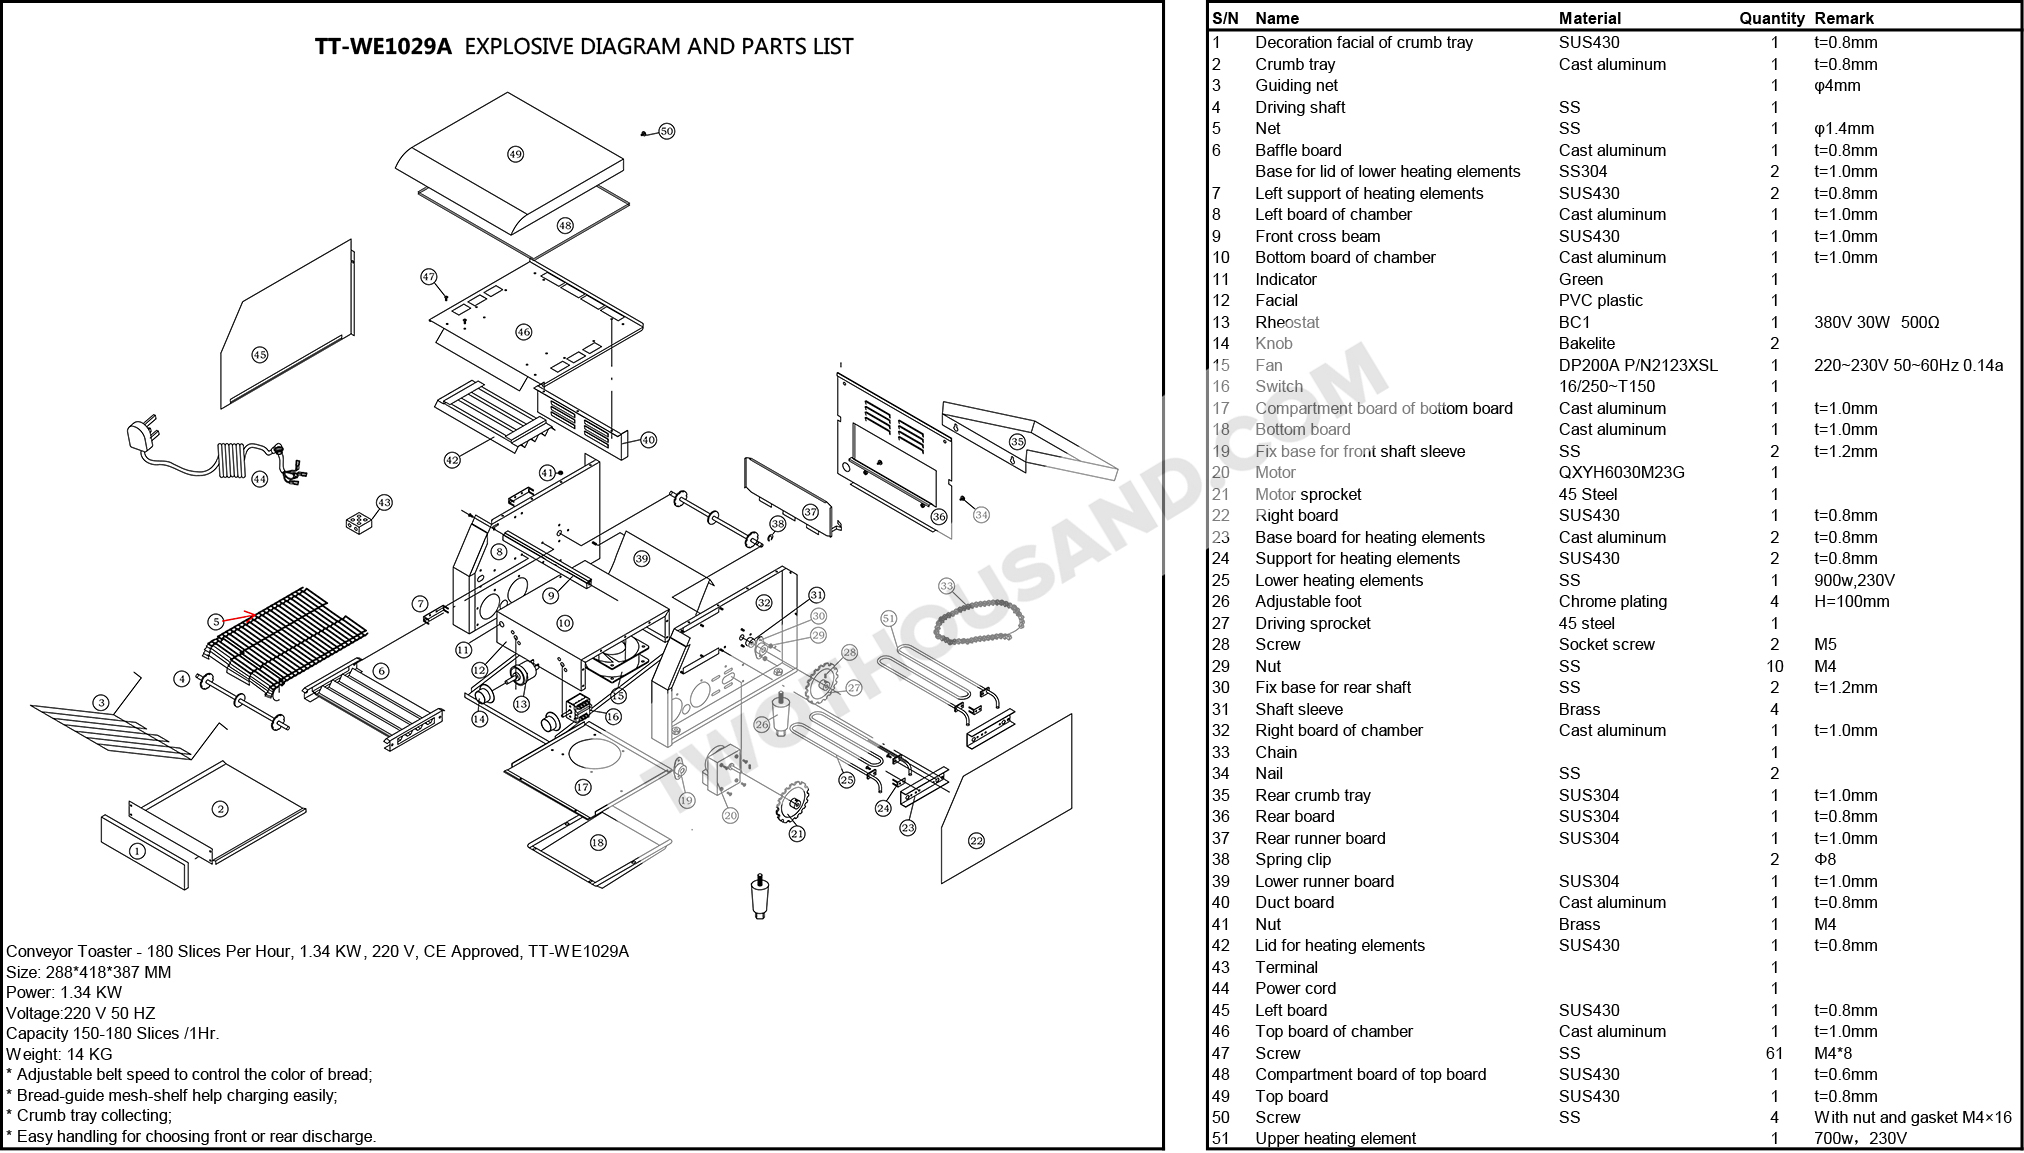 Explosive Diagram and Parts List, Conveyor Toaster, TT-WE1029A